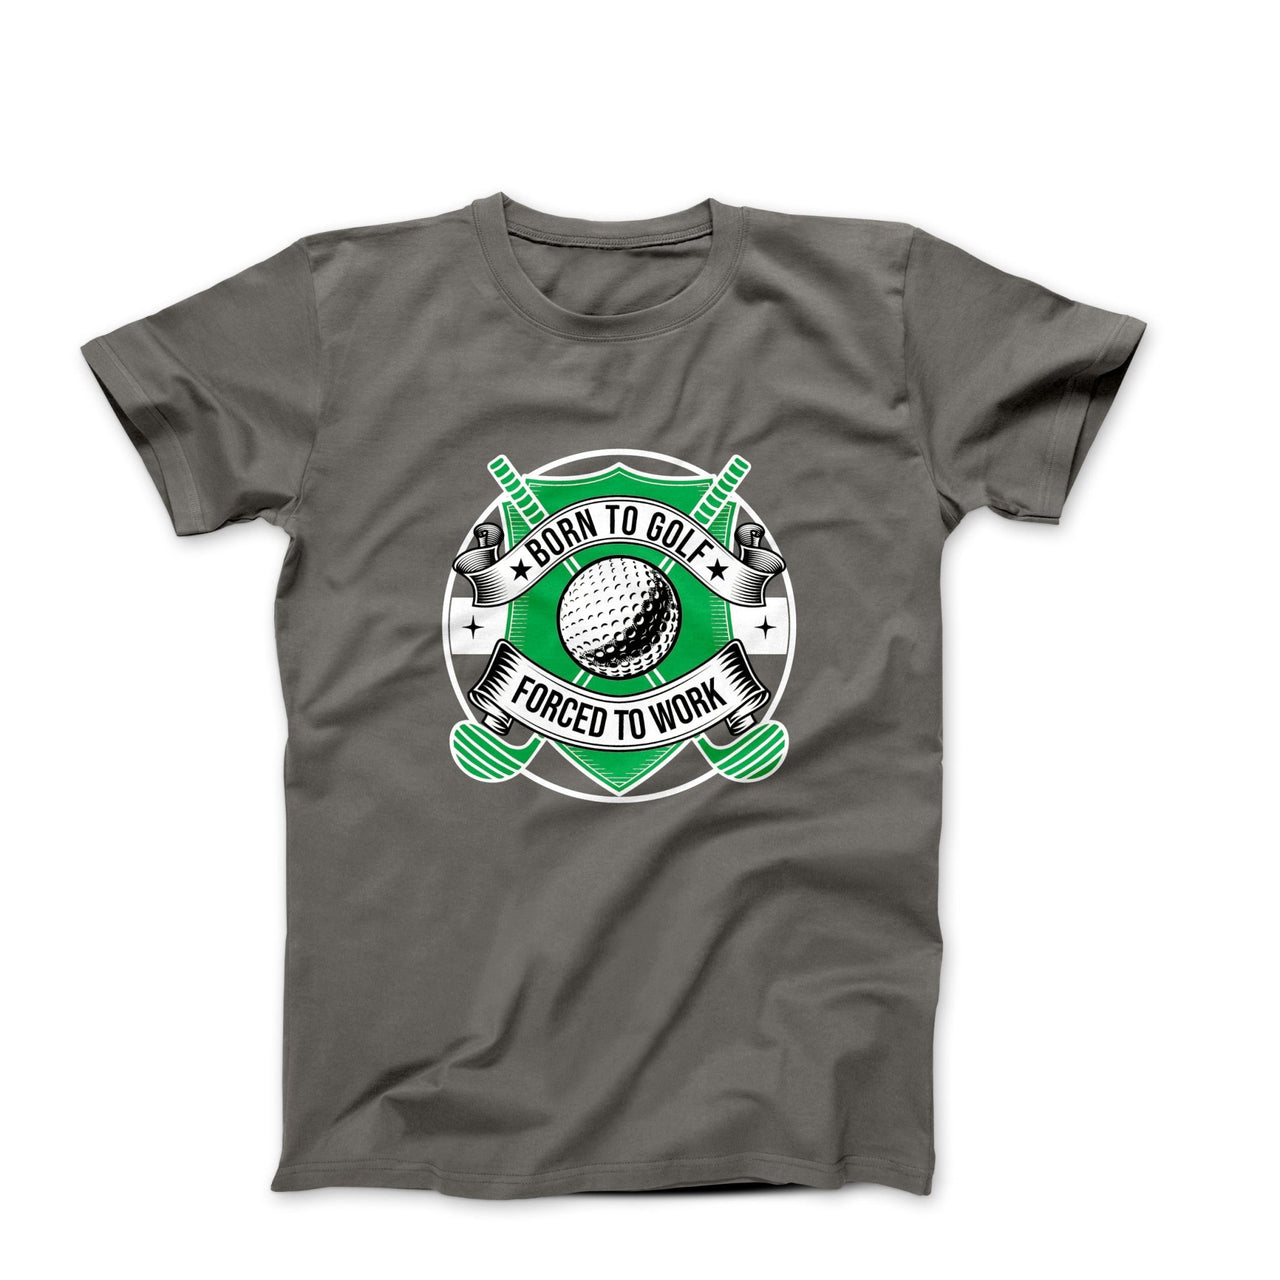 Born to Golf, Forced to Work Graphic T-shirt - Clothing - Harvey Ltd